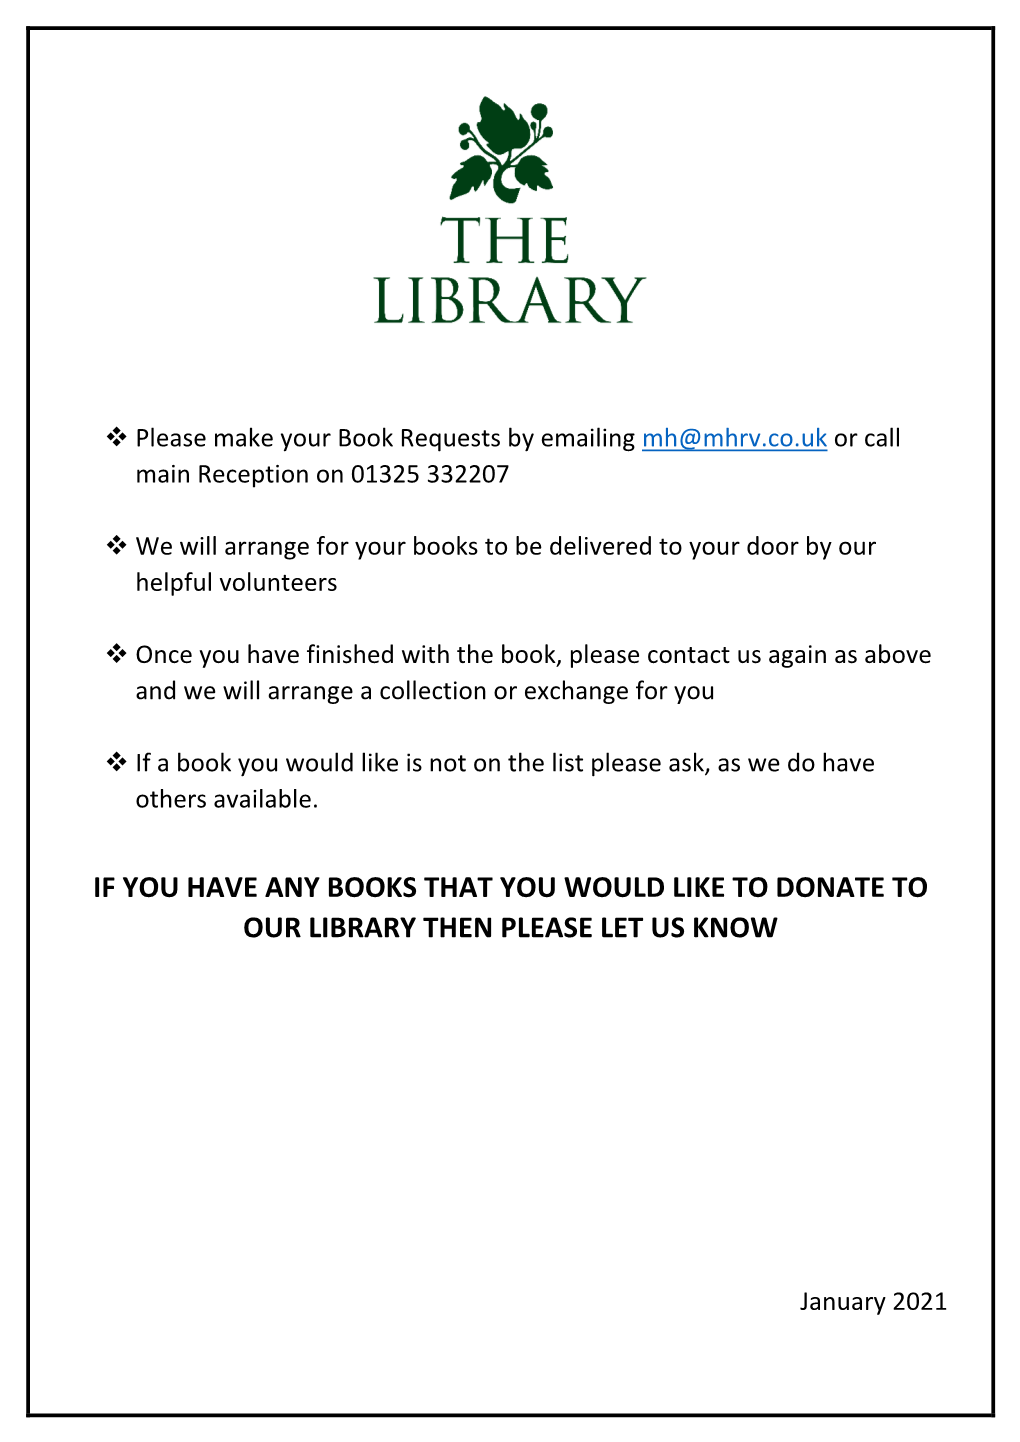 If You Have Any Books That You Would Like to Donate to Our Library Then Please Let Us Know